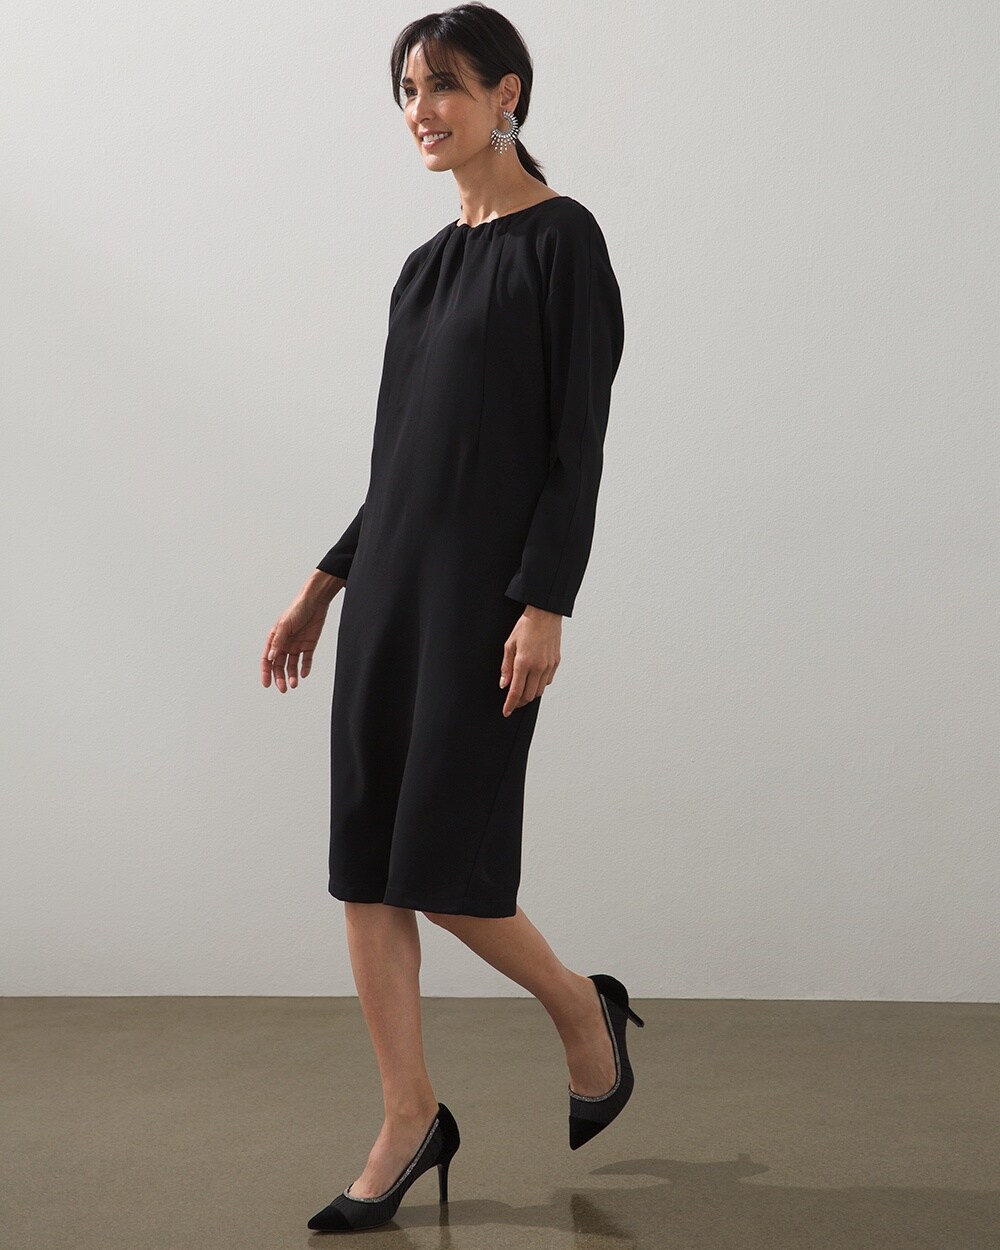 Tie-Back Crepe Midi Dress video preview image, click to start video